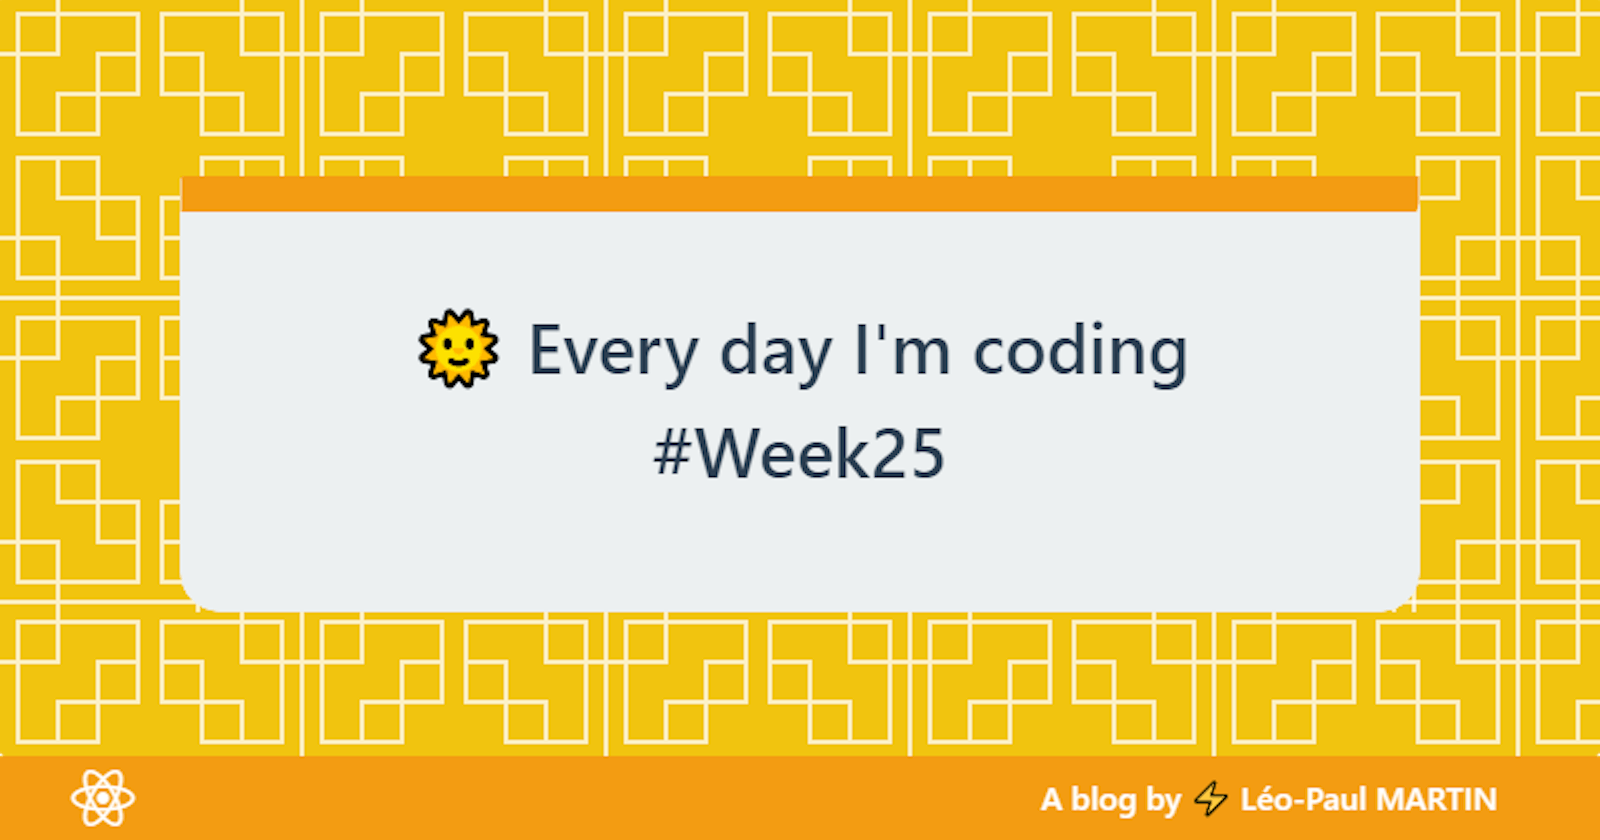 🌞 Every day I'm coding #Week25